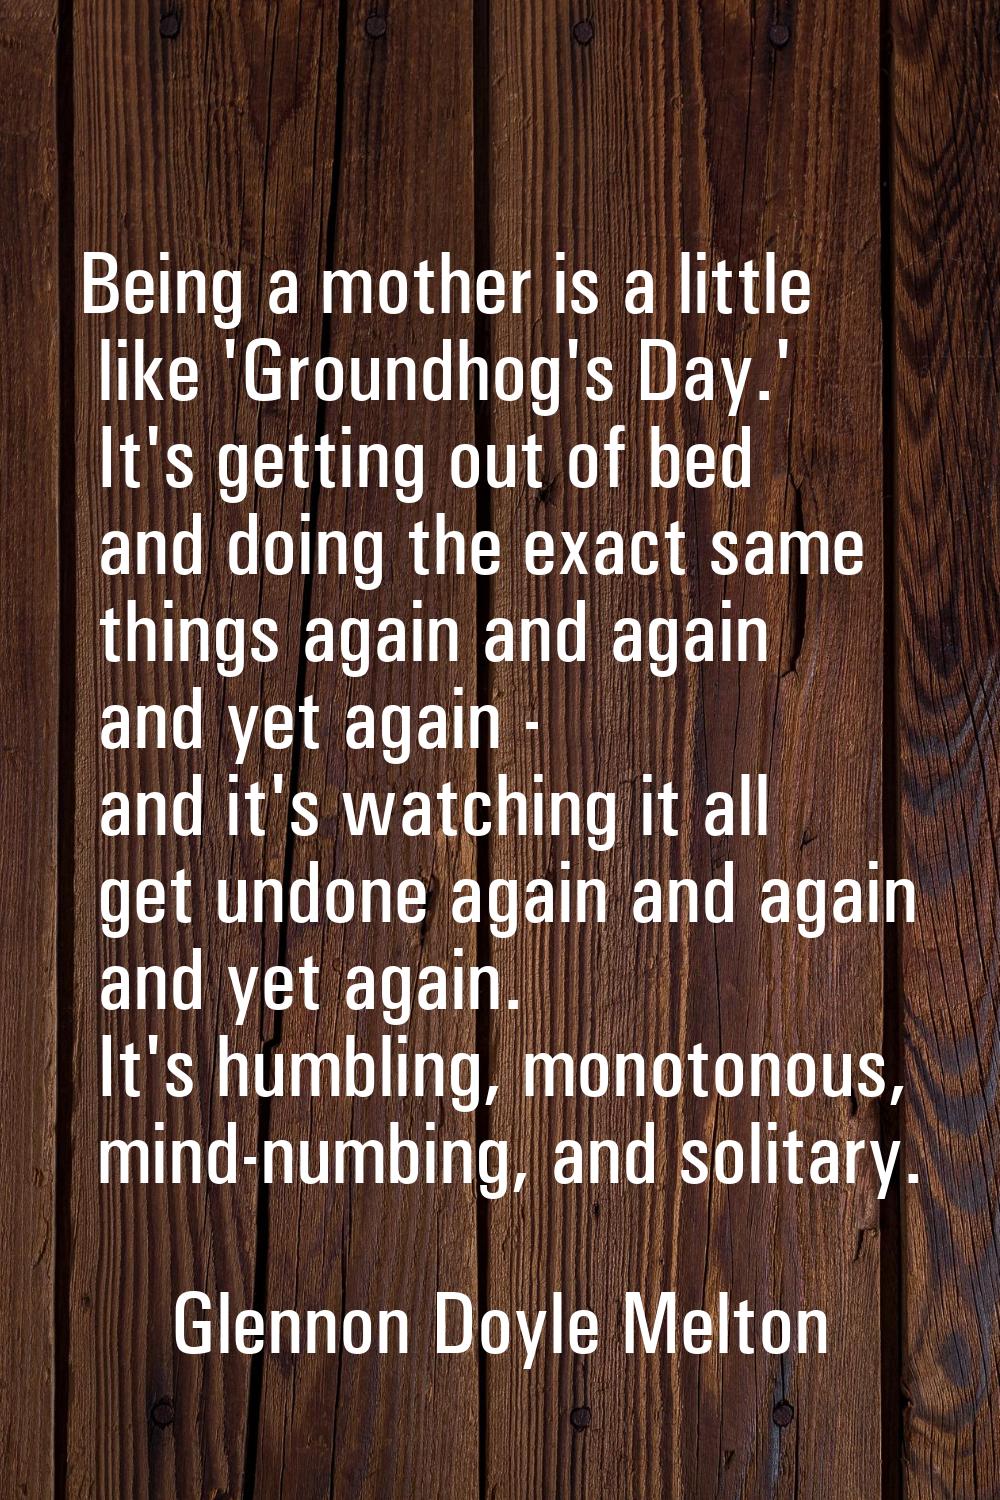 Being a mother is a little like 'Groundhog's Day.' It's getting out of bed and doing the exact same